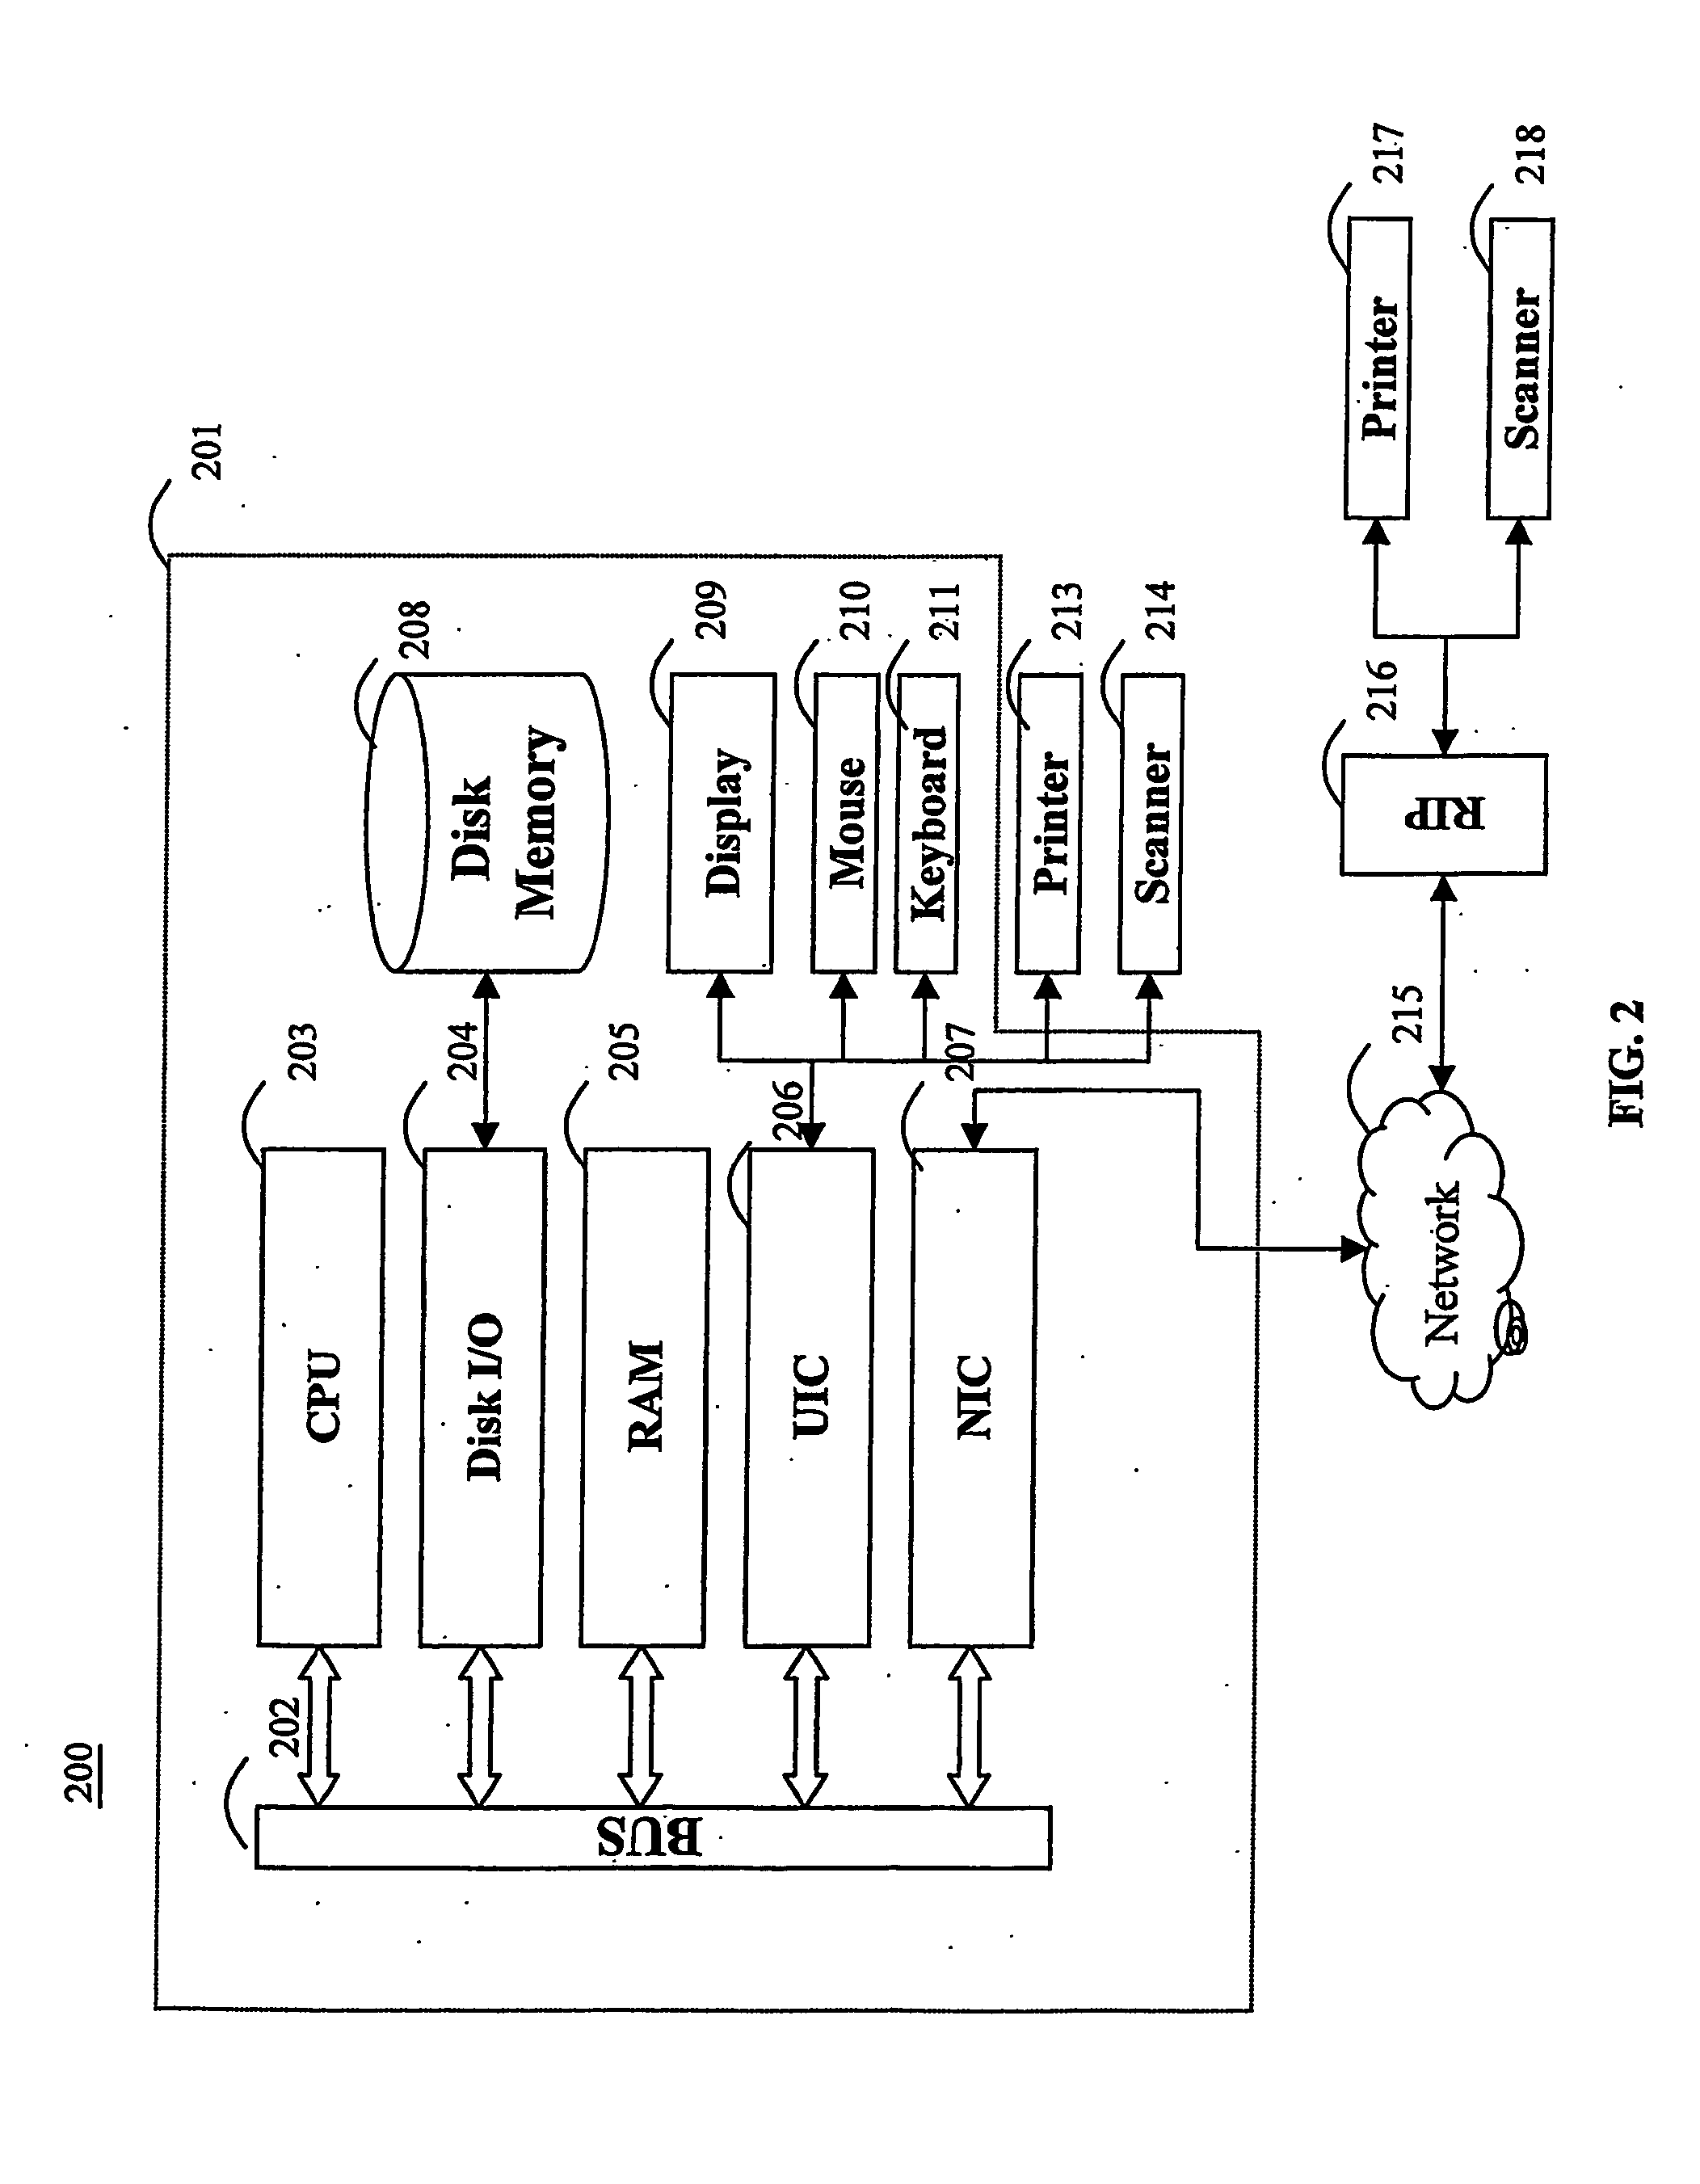 Method and apparatus for calibrating colour print engines